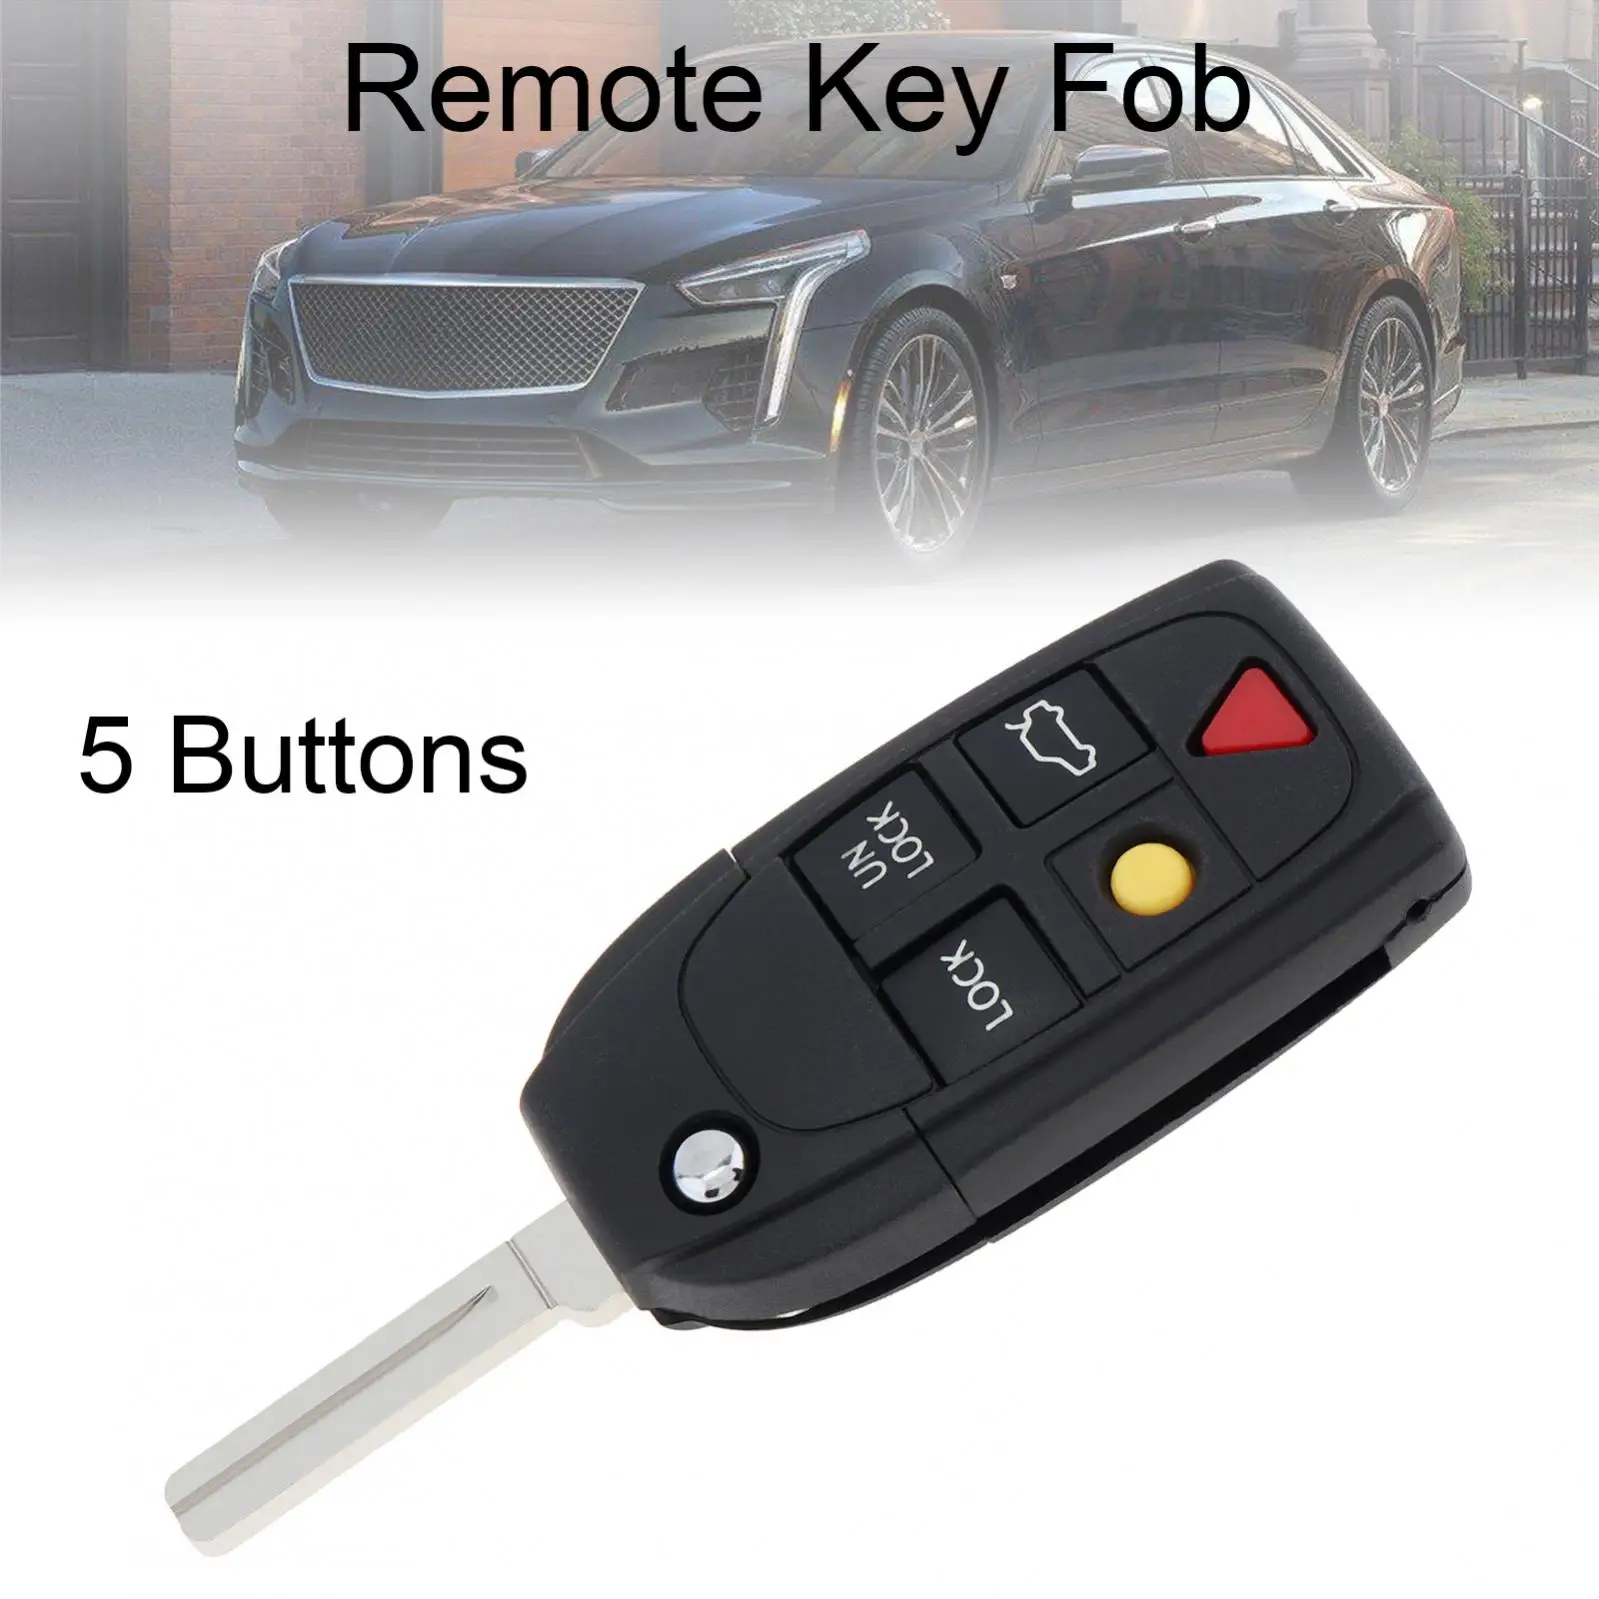 5 Buttons Car Key Fob Case Shell Replacement Flip Folding Remote Cover Car Key Accessories Fit for VOLVO S60 S80 V70 XC90 qwmend 5 buttons replacement smart car key fob case for volvo xc70 xc90 v50 v70 s60 s80 c30 remote flip key shell